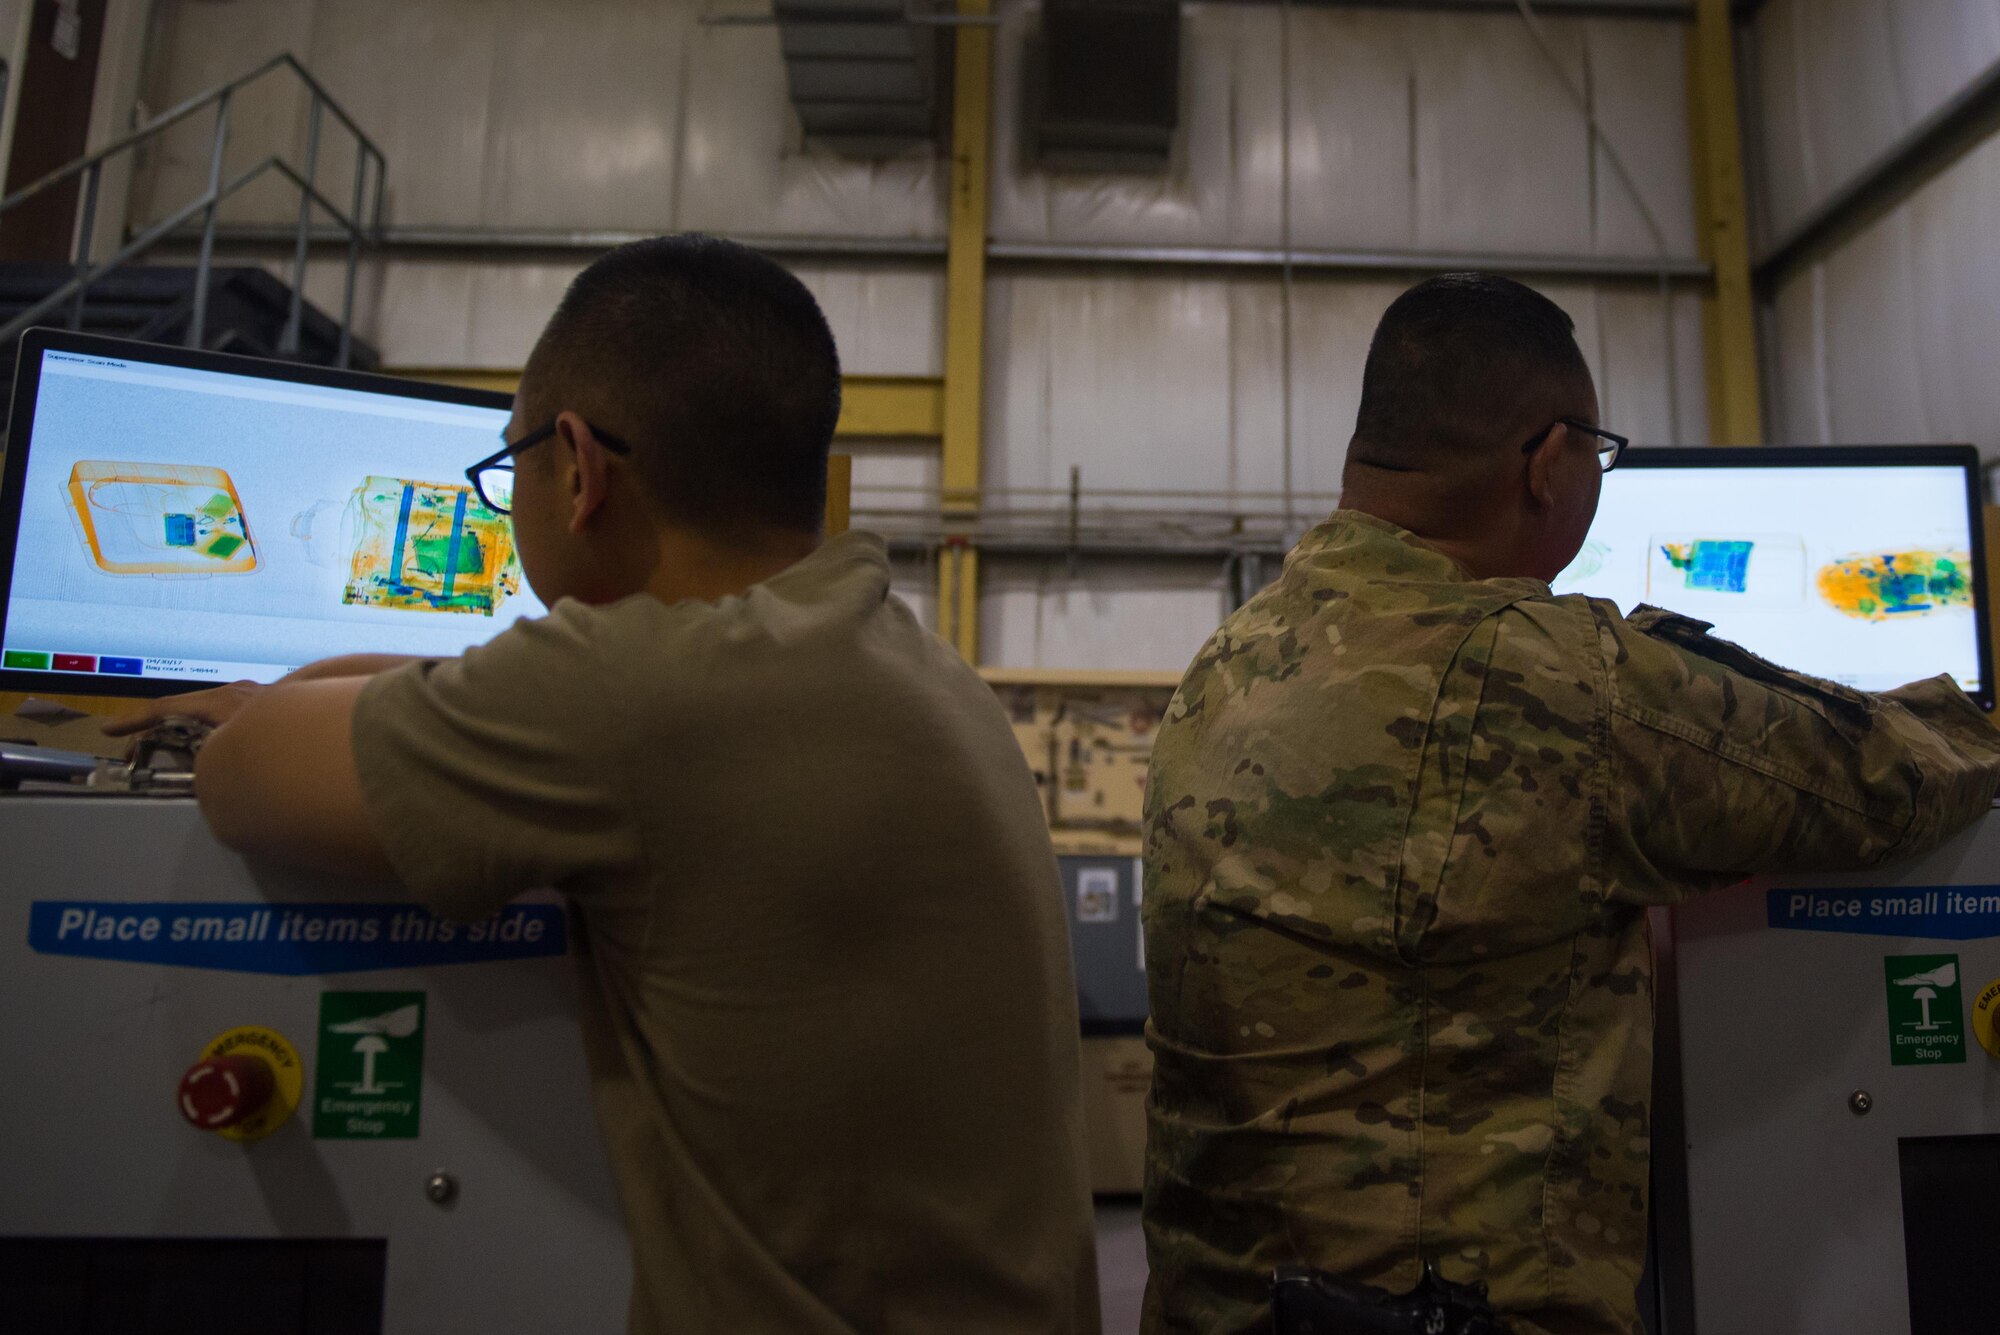 Soldiers assigned to the 368th Military Police Company from Guam scan through luggage at Bagram Airfield, April 30, 2017. The 368th Military Police Company is a U.S. Army Reserve organization based out of Guam, which is located on a 210-square-mile island in the middle of the Pacific Ocean. (U.S. Air Force photo by Staff Sgt. Benjamin Gonsier)